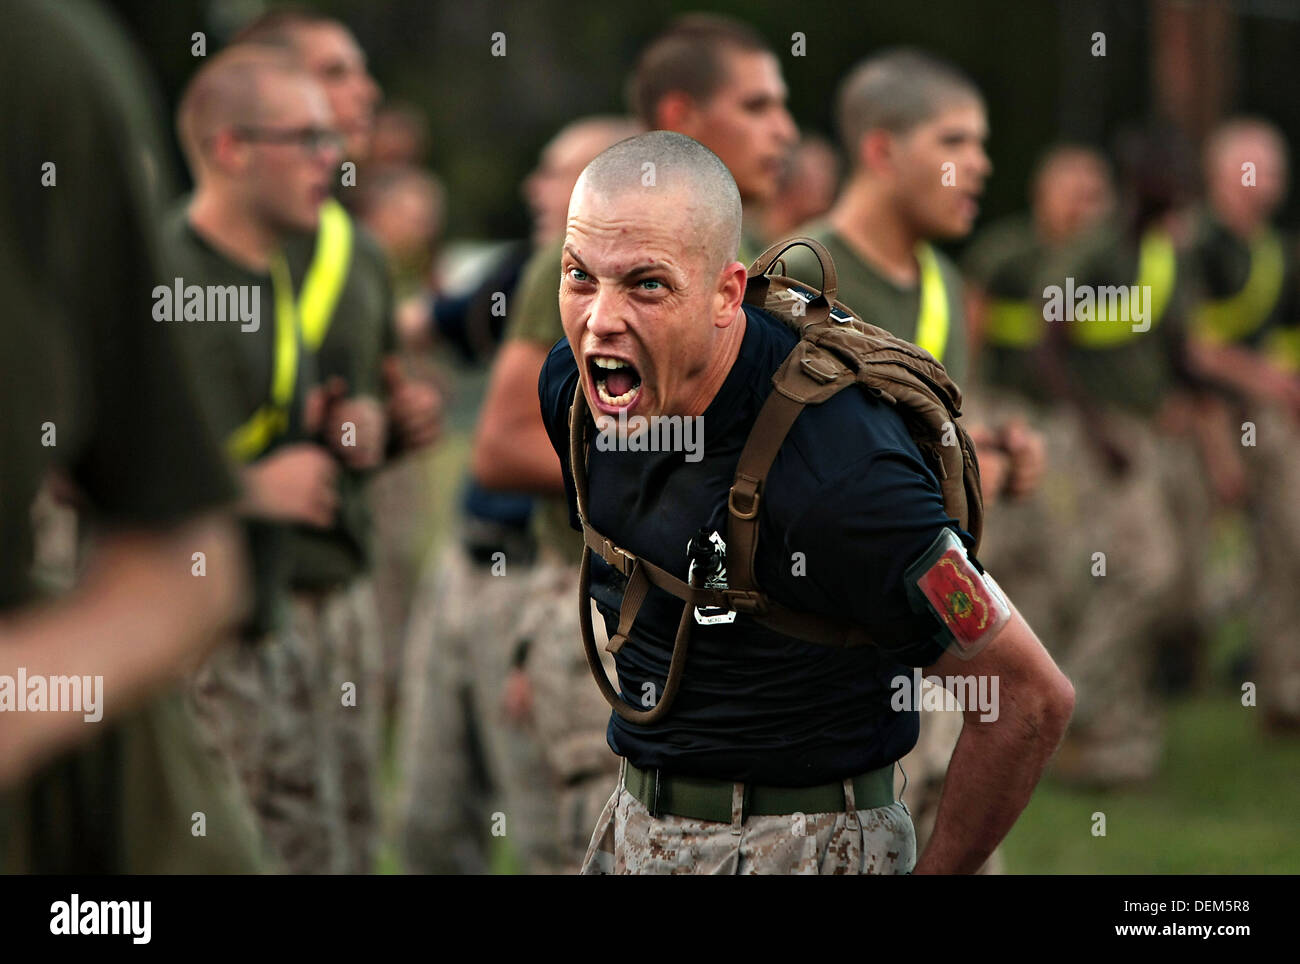 US Marine Corps drill instructor Sgt. William Loughran screams at recruits during physical training at Marine Corps Recruit Depot September 18, 2013 on Parris Island, S.C. Stock Photo